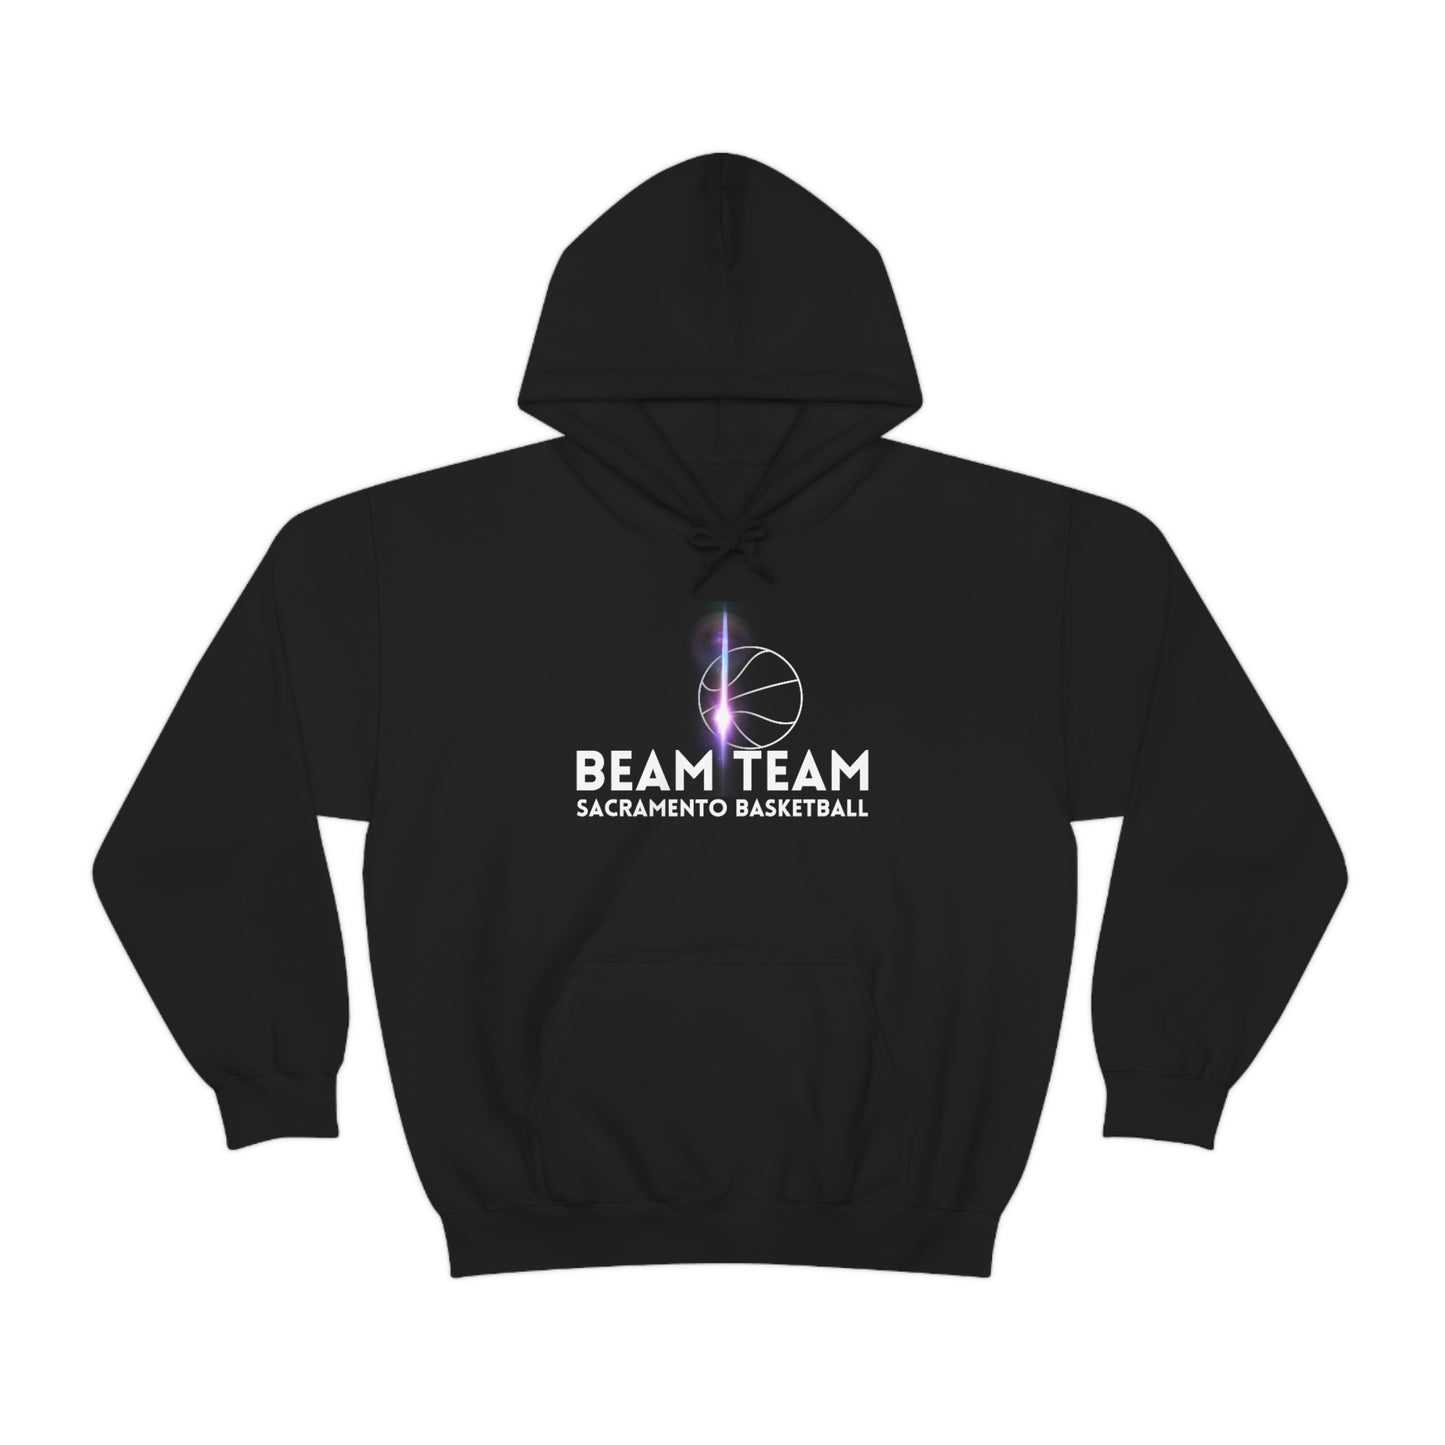 Beam Team, Kings Basketball, Unisex Hoodie Sweatshirt, Sacramento Basketball, Kings Team Gift, Sacramento Basketball Team Gift,Beam Team - Light the Beam! Celebrate another W - WIN - for your Kings Basketball team in this comfortable, cool hoodie. Perfect to keep you warm at the game or the day after another W. It's going to be an epic season for our Sacramento Basketball team - show off your Sac Town pride.